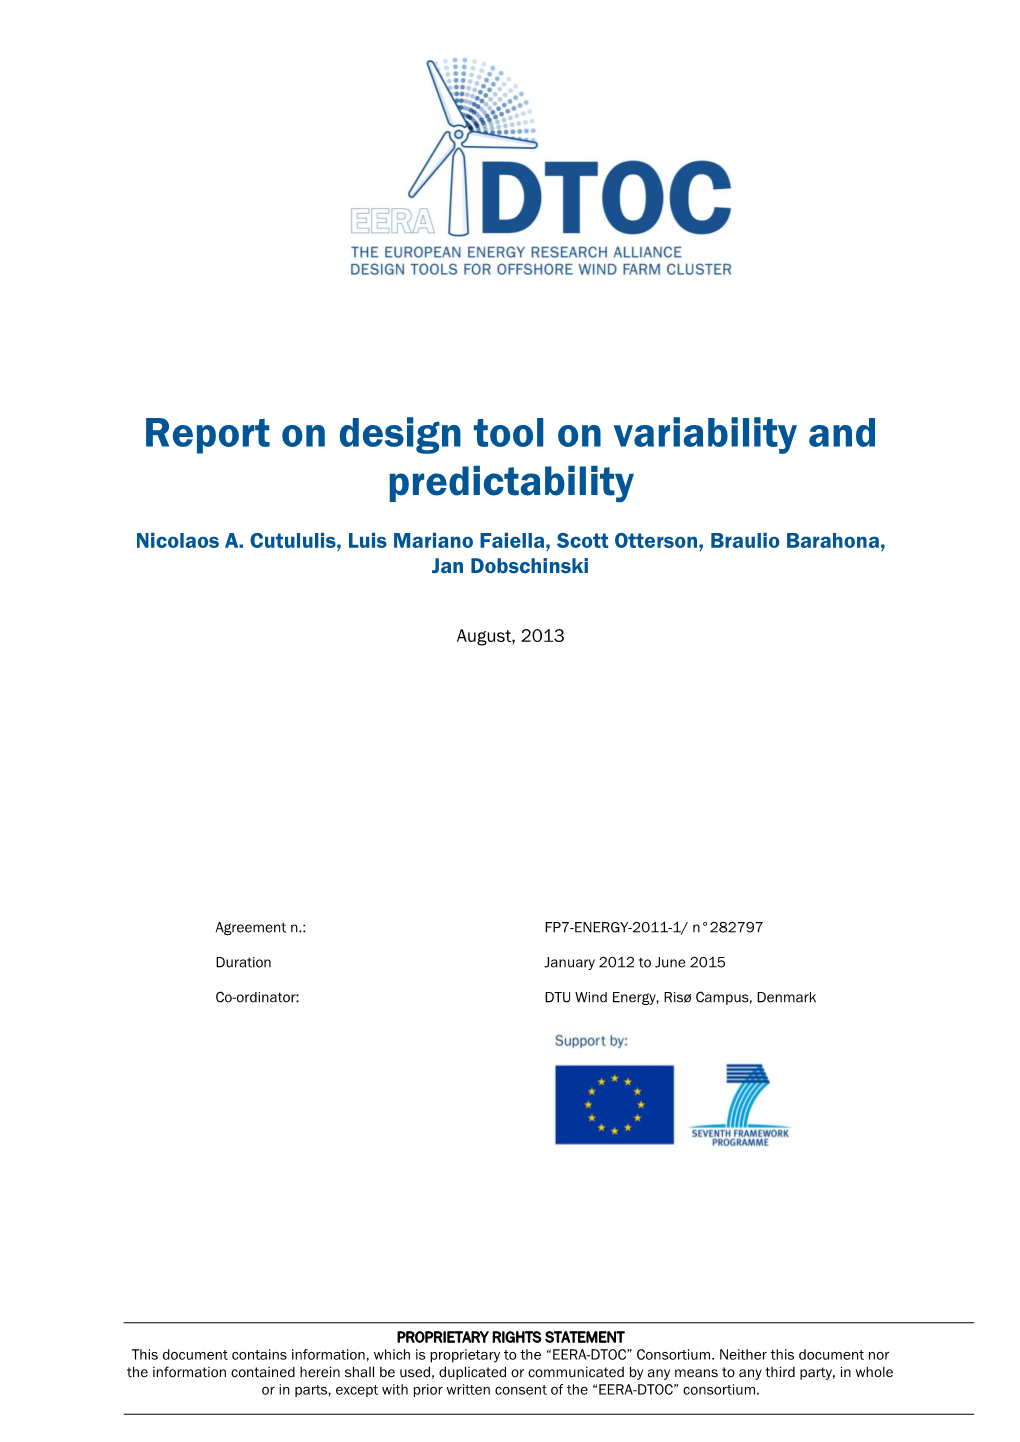 Report on Design Tool on Variability and Predictability